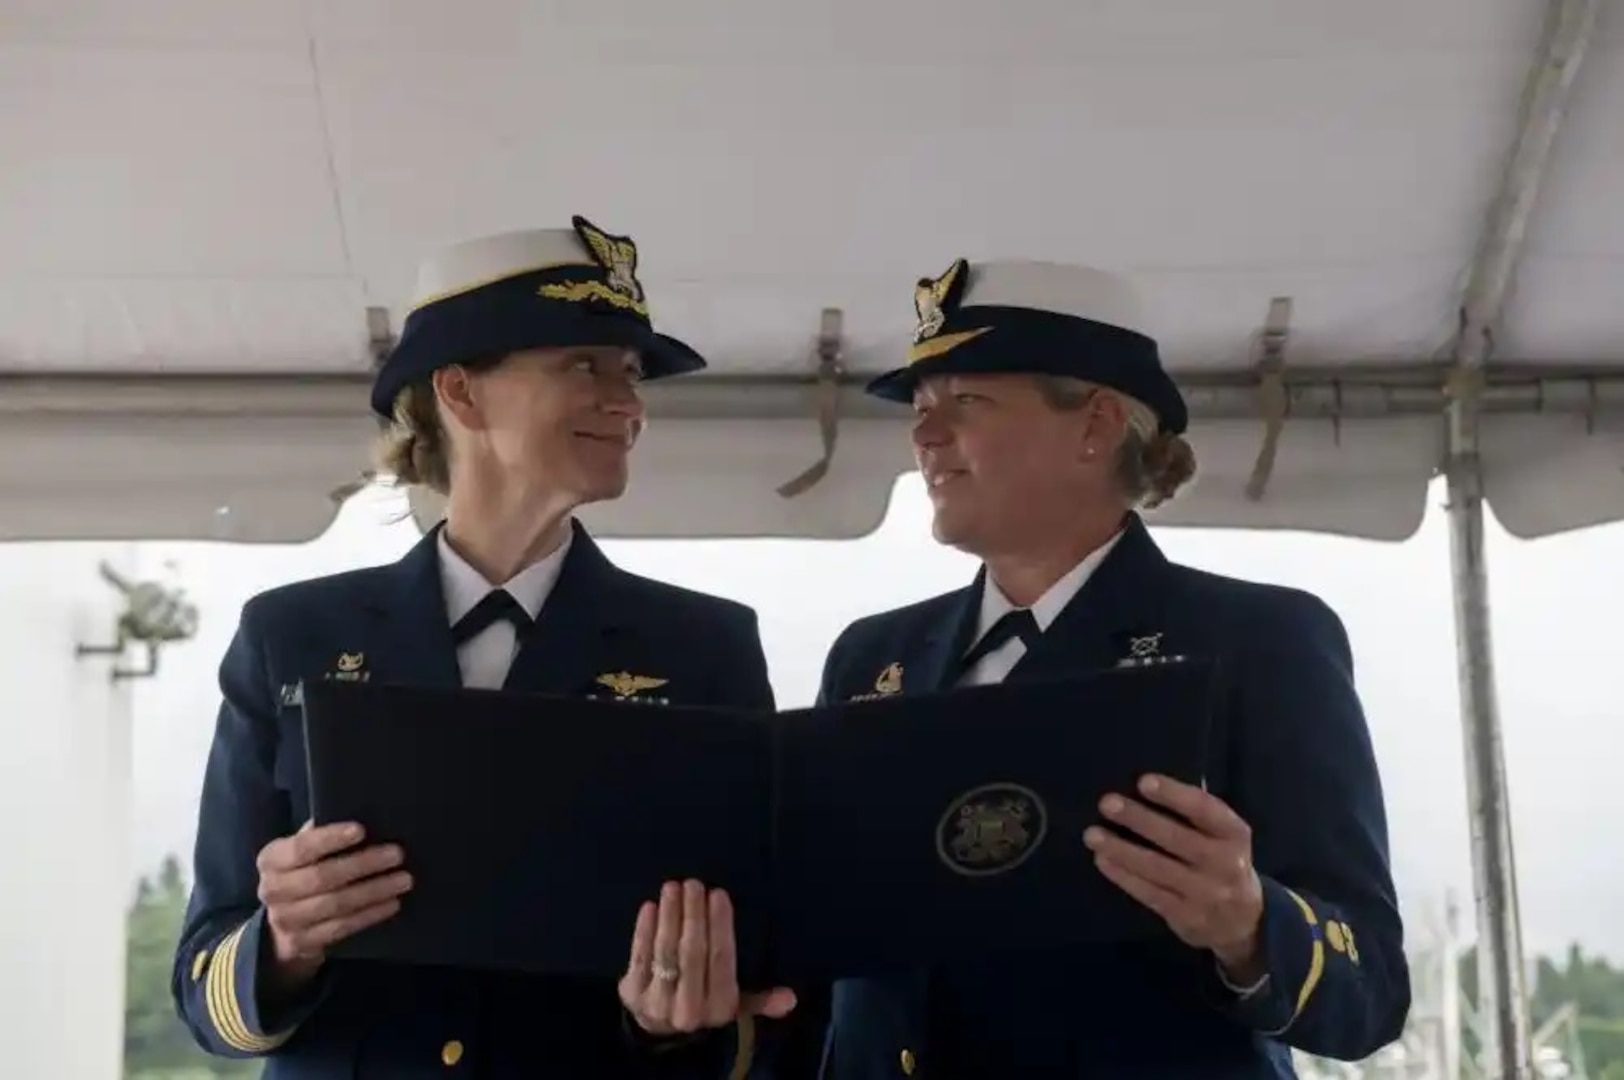 Capt. Breanna Knutson (left), commander Coast Guard Sector North Bend, Oregon, reads an award with Chief Warrant Officer Beth Slade (right) during Coast Guard Station Coos Bay's change of command ceremony in Coos Bay, Oregon, Jun. 10, 2022. Slade was congratulated for her efforts in helping a pregnant member who assisted in the betterment of women's retention in the Coast Guard. (U.S. Coast Guard photo by Petty Officer 3rd Class Diolanda Caballero)